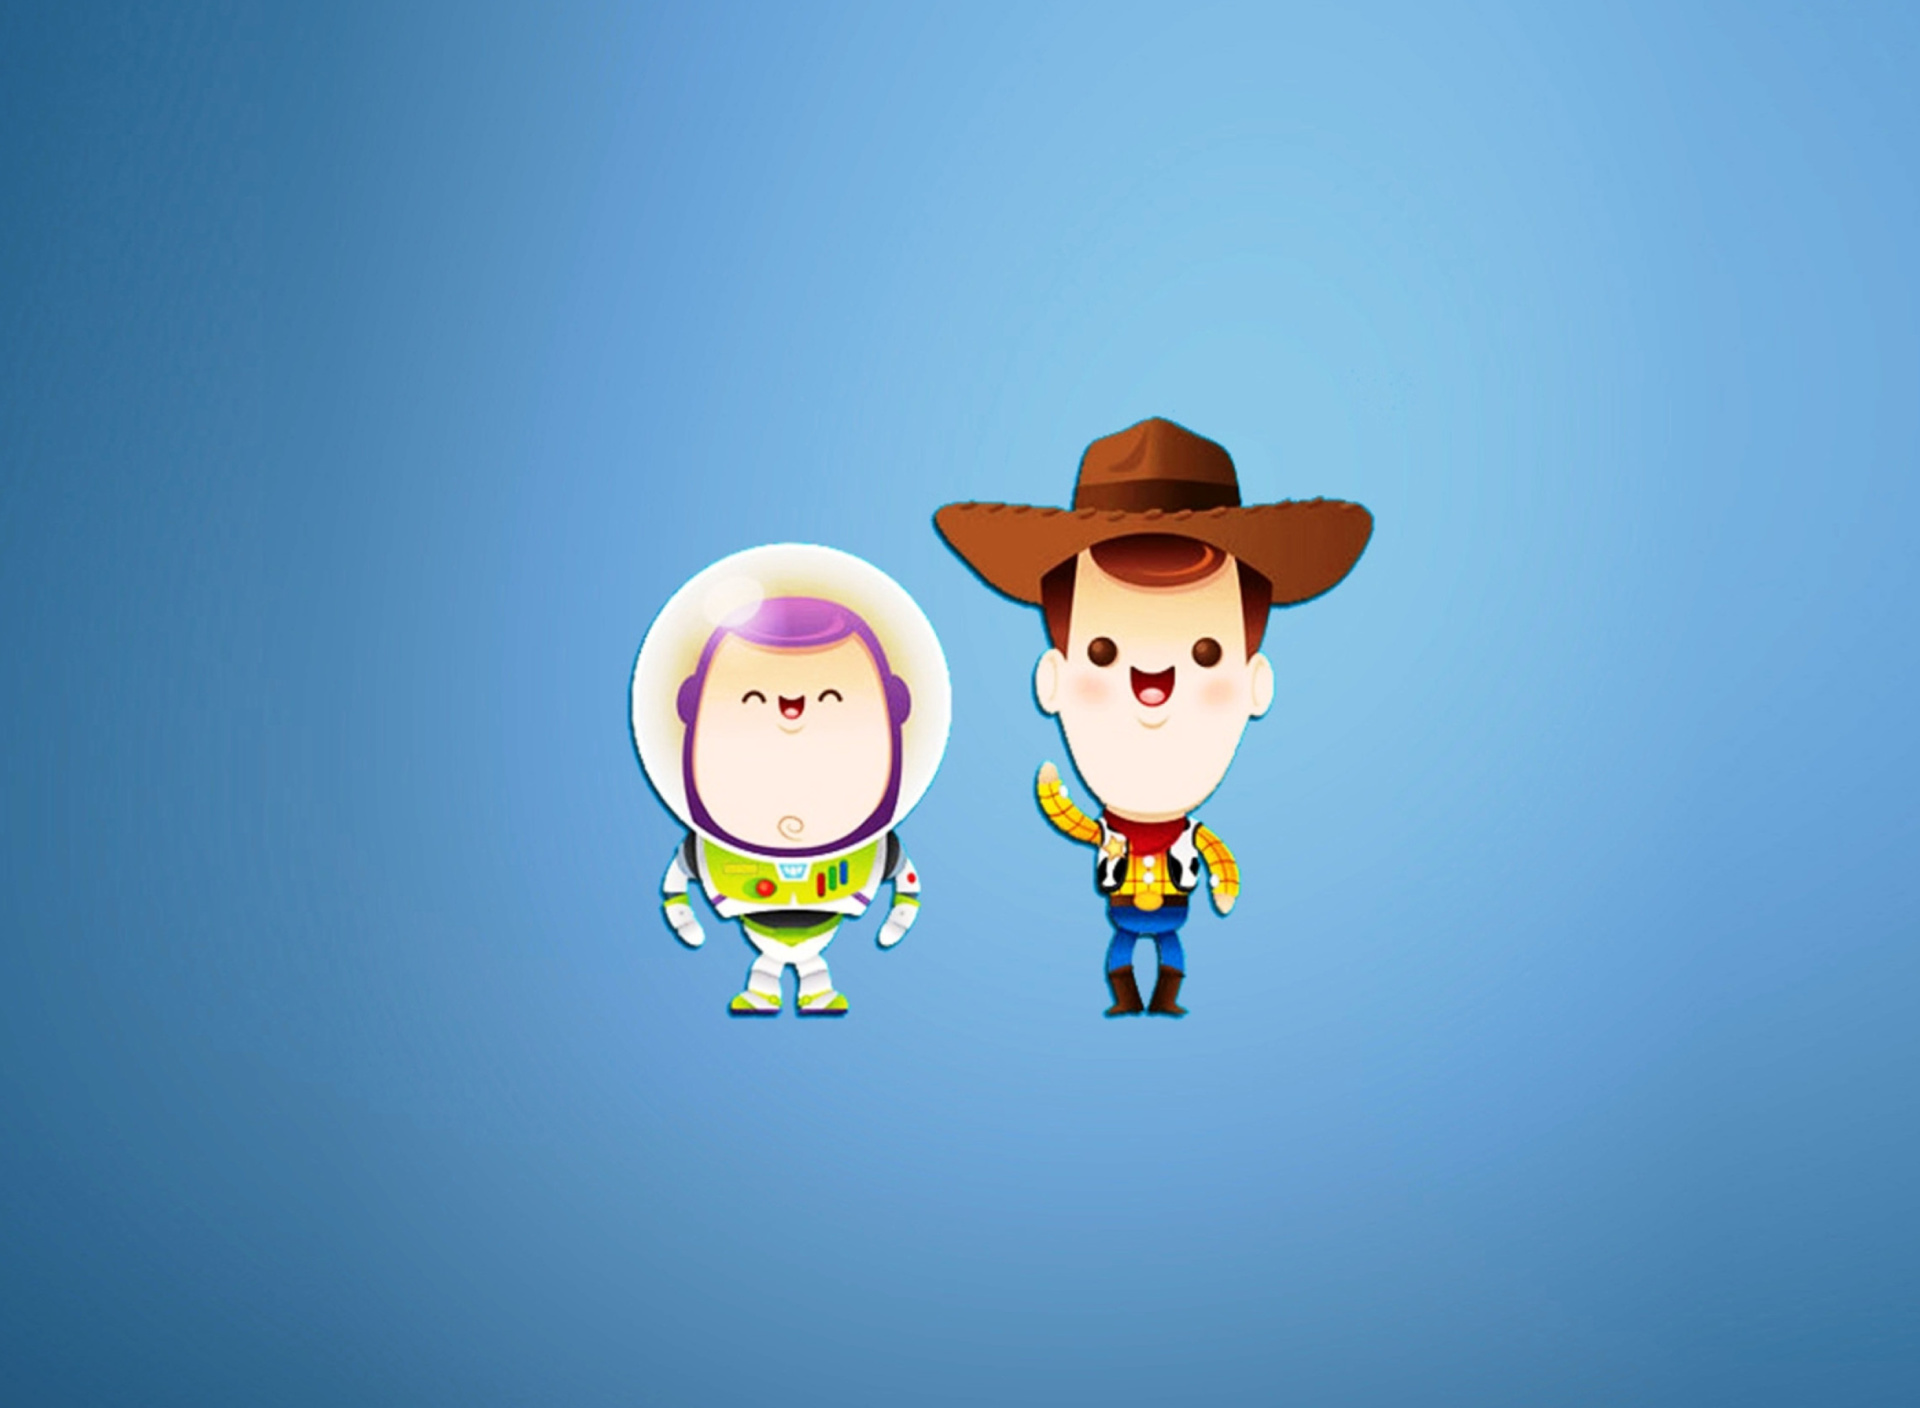 Buzz and Woody in Toy Story screenshot #1 1920x1408